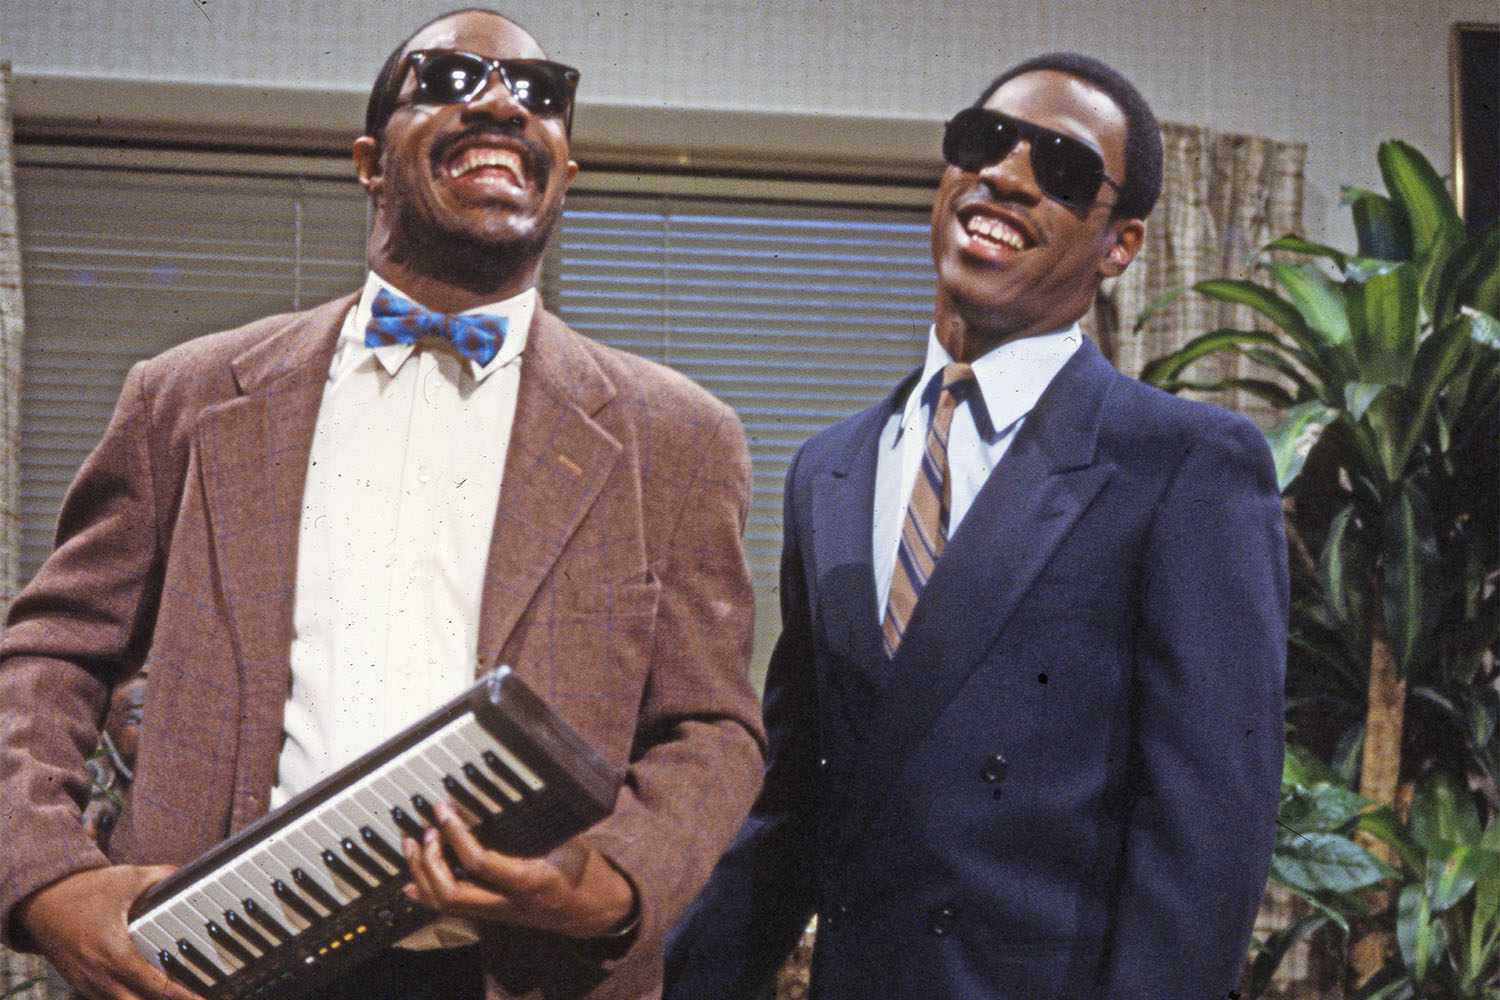 American musician Stevie Wonder appears on an episode of 'Saturday Night Live' with comedian and actor Eddie Murphy (dressed as Stevie Wonder), New York, New York, 1983. (Photo by Anthony Barboza/Getty Images)